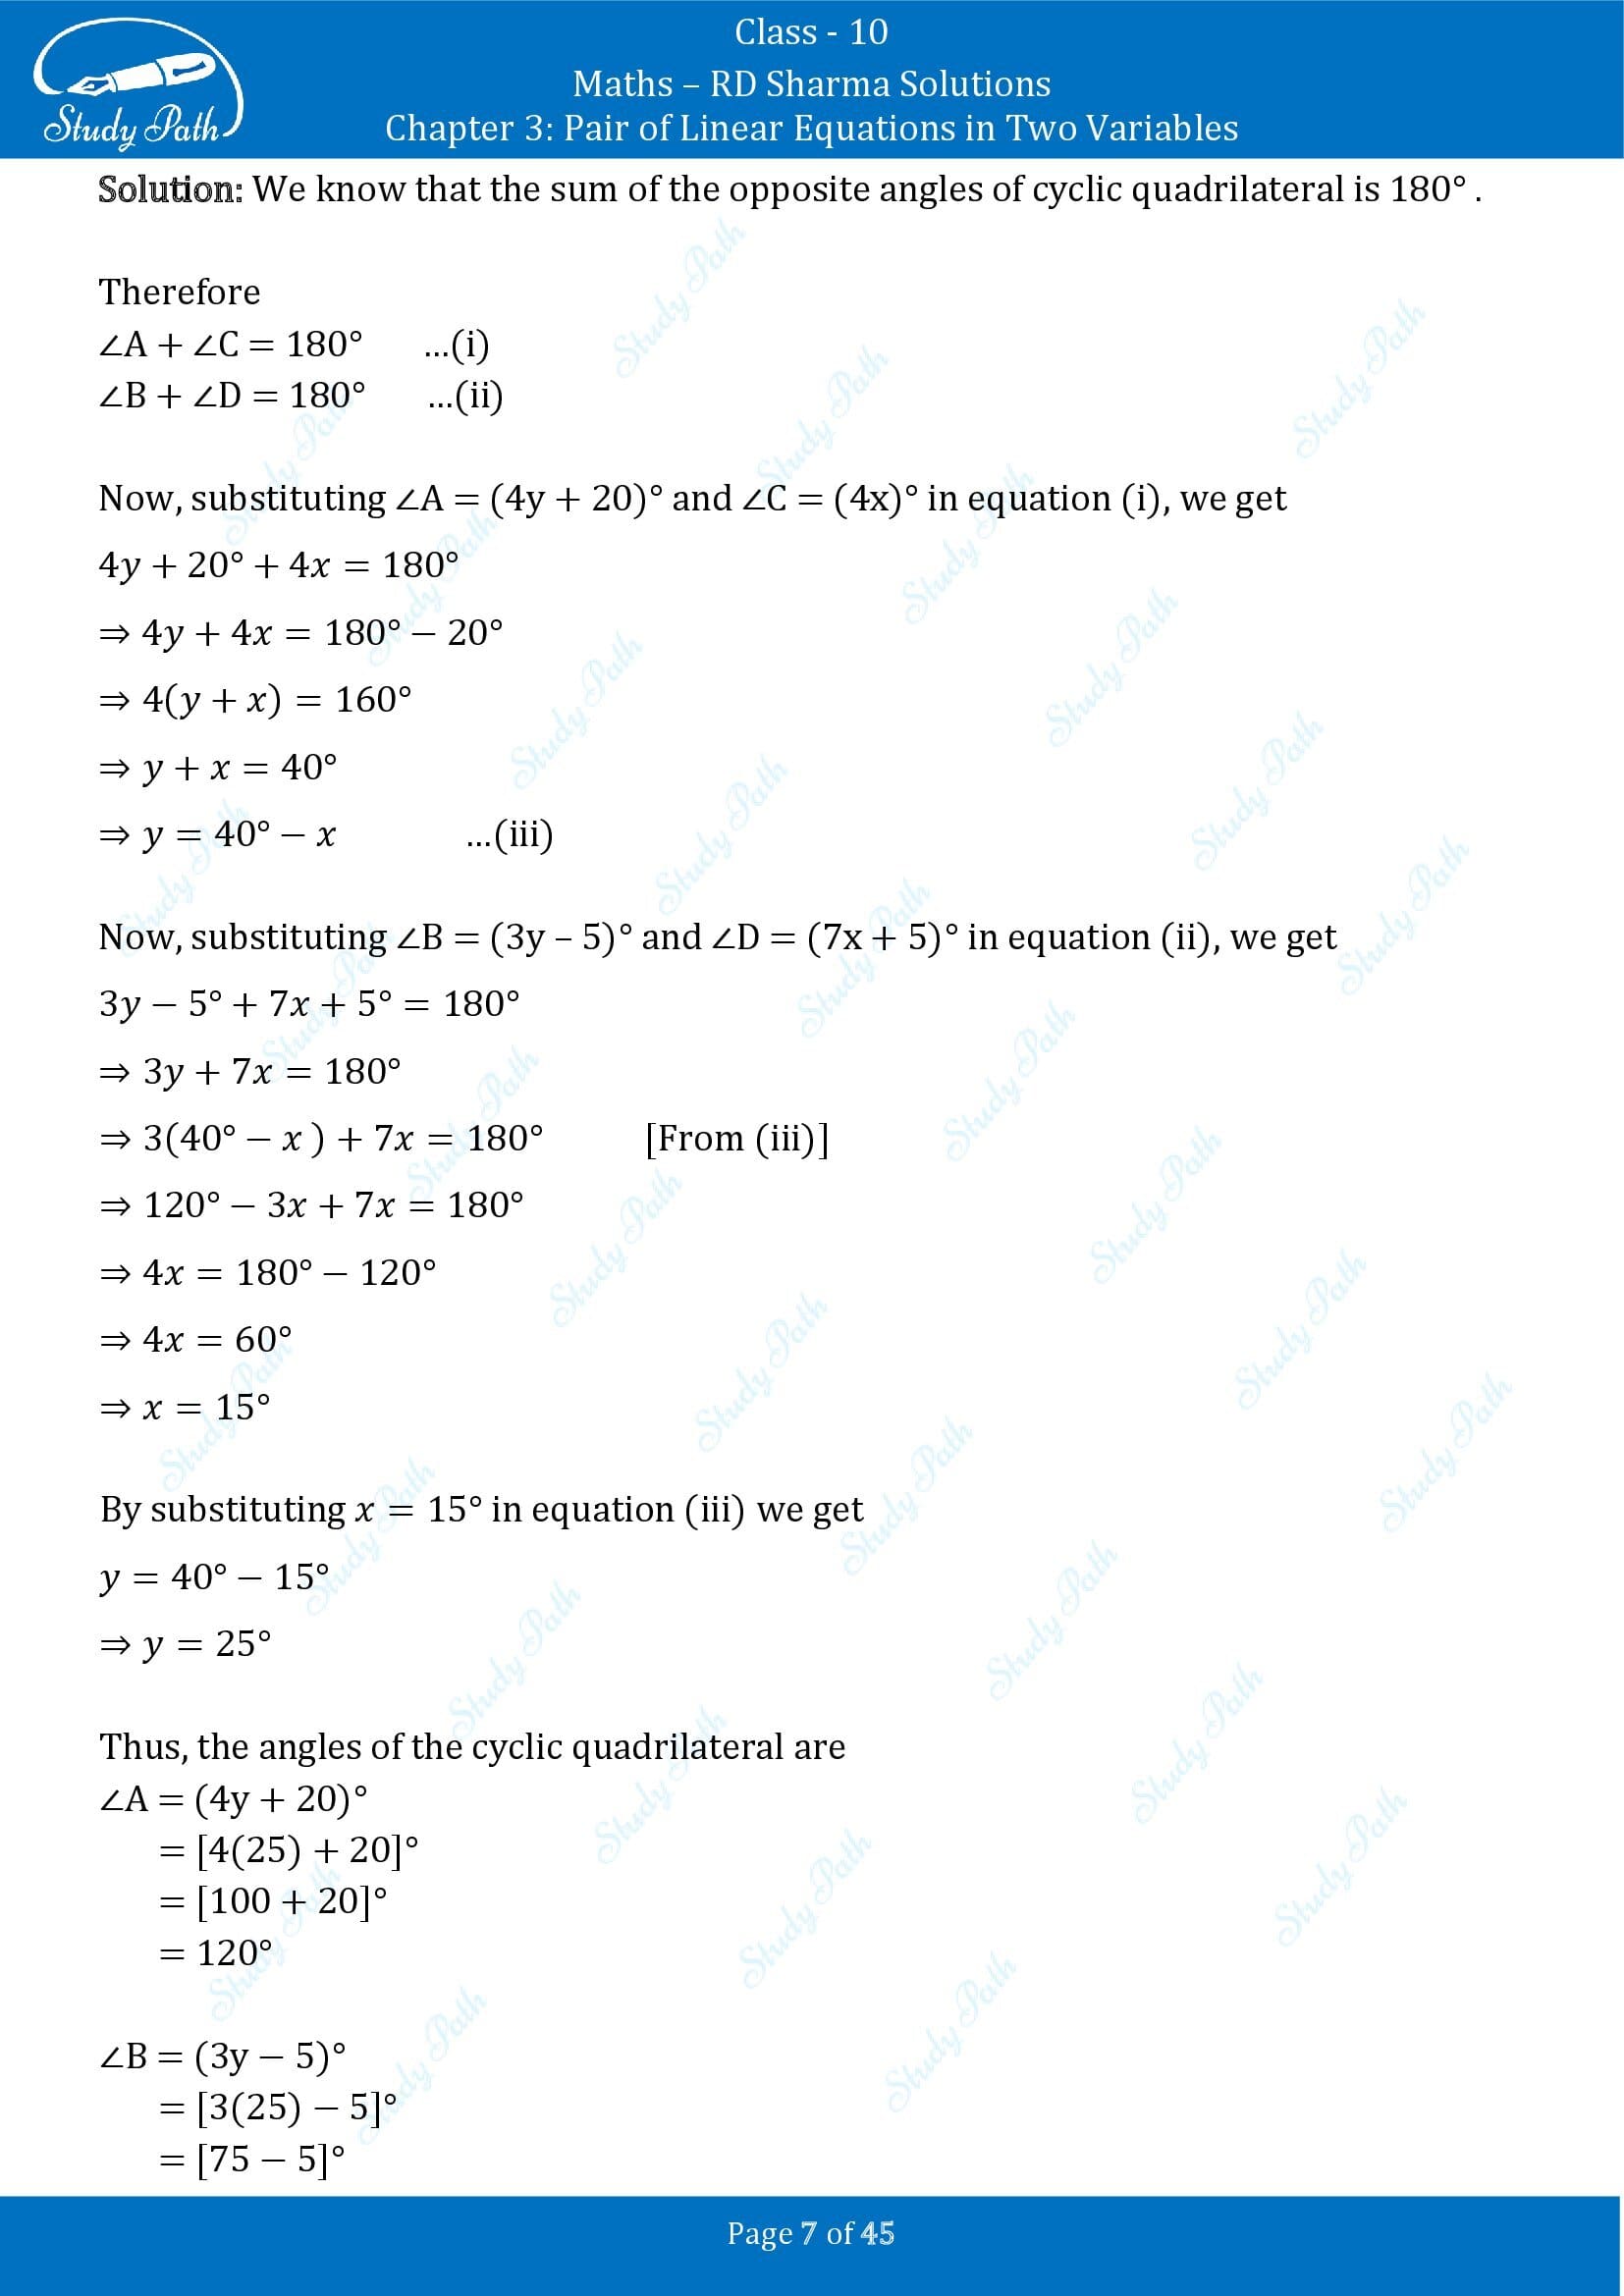 RD Sharma Solutions Class 10 Chapter 3 Pair of Linear Equations in Two Variables Exercise 3.11 00007